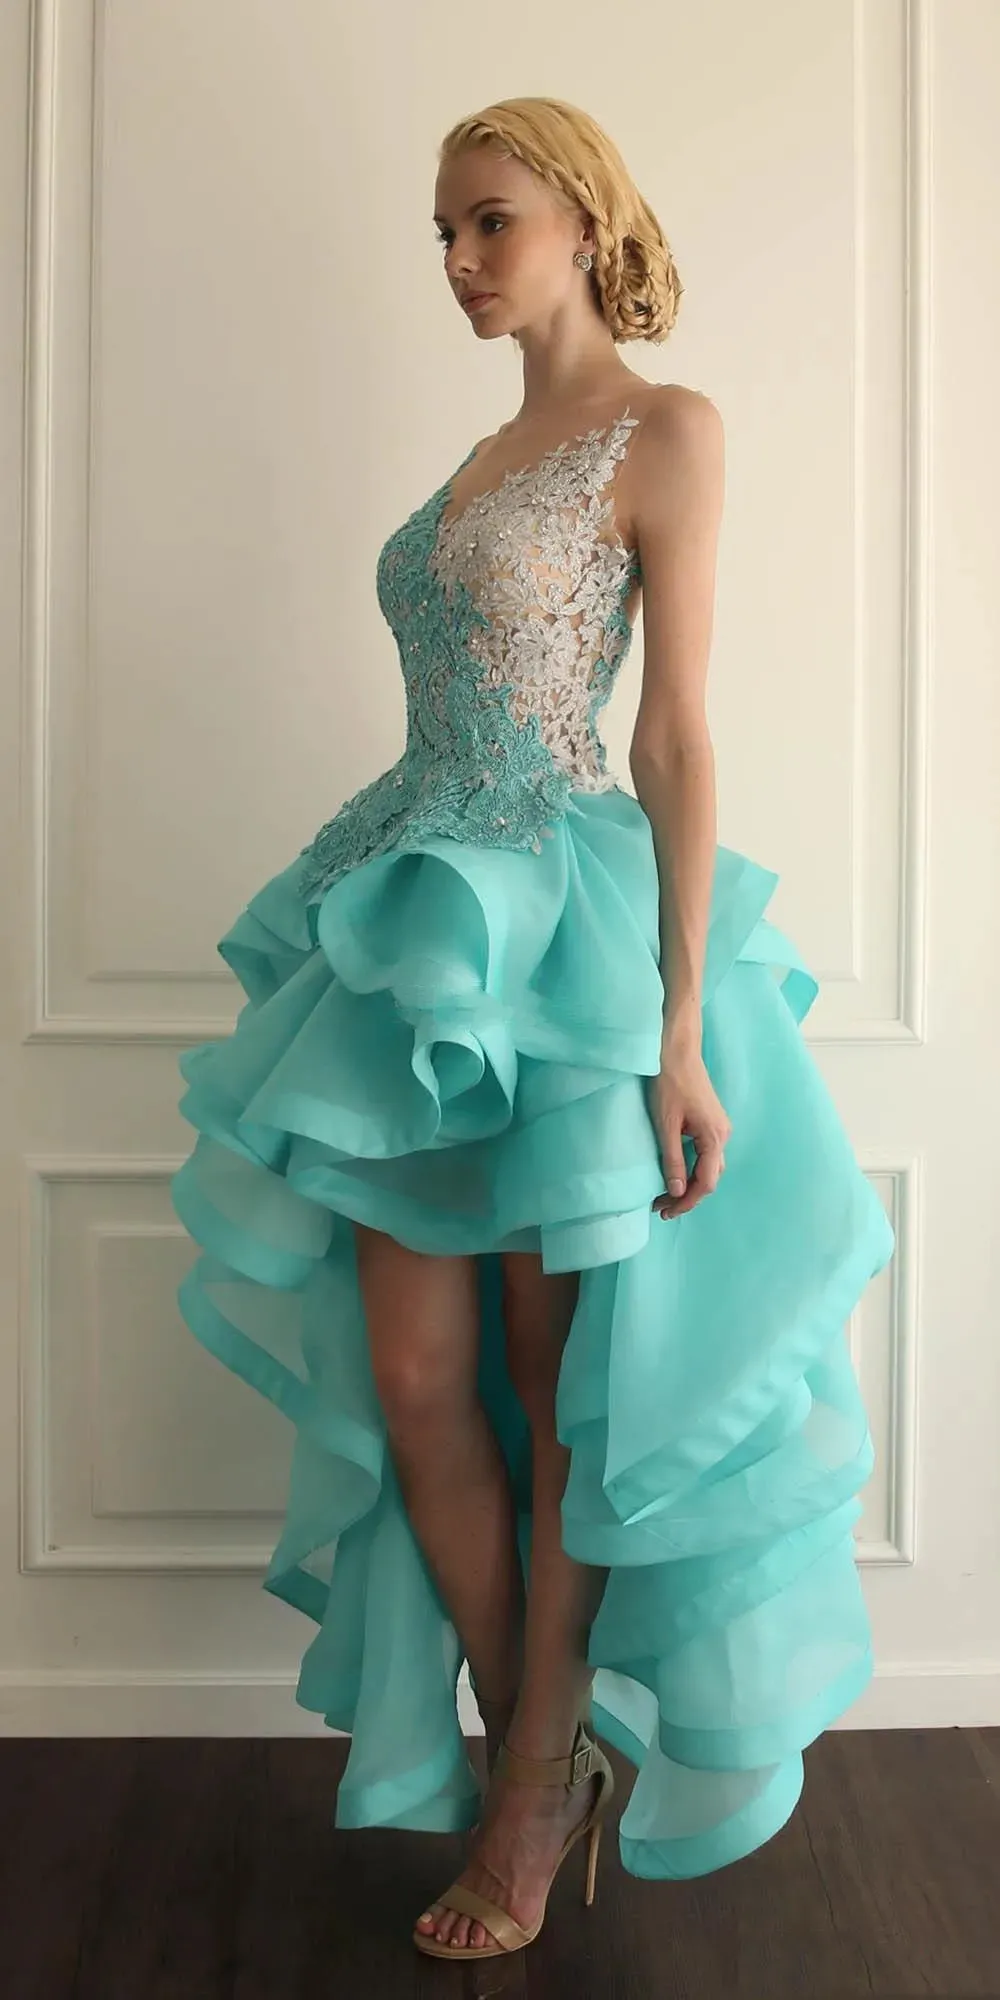 Jewel Sheer Neckline High Low Short Homecoming Dresses Turquoise Prom Gowns With Lace Applique Backless Ruffles Cocktail Gowns Custom Made